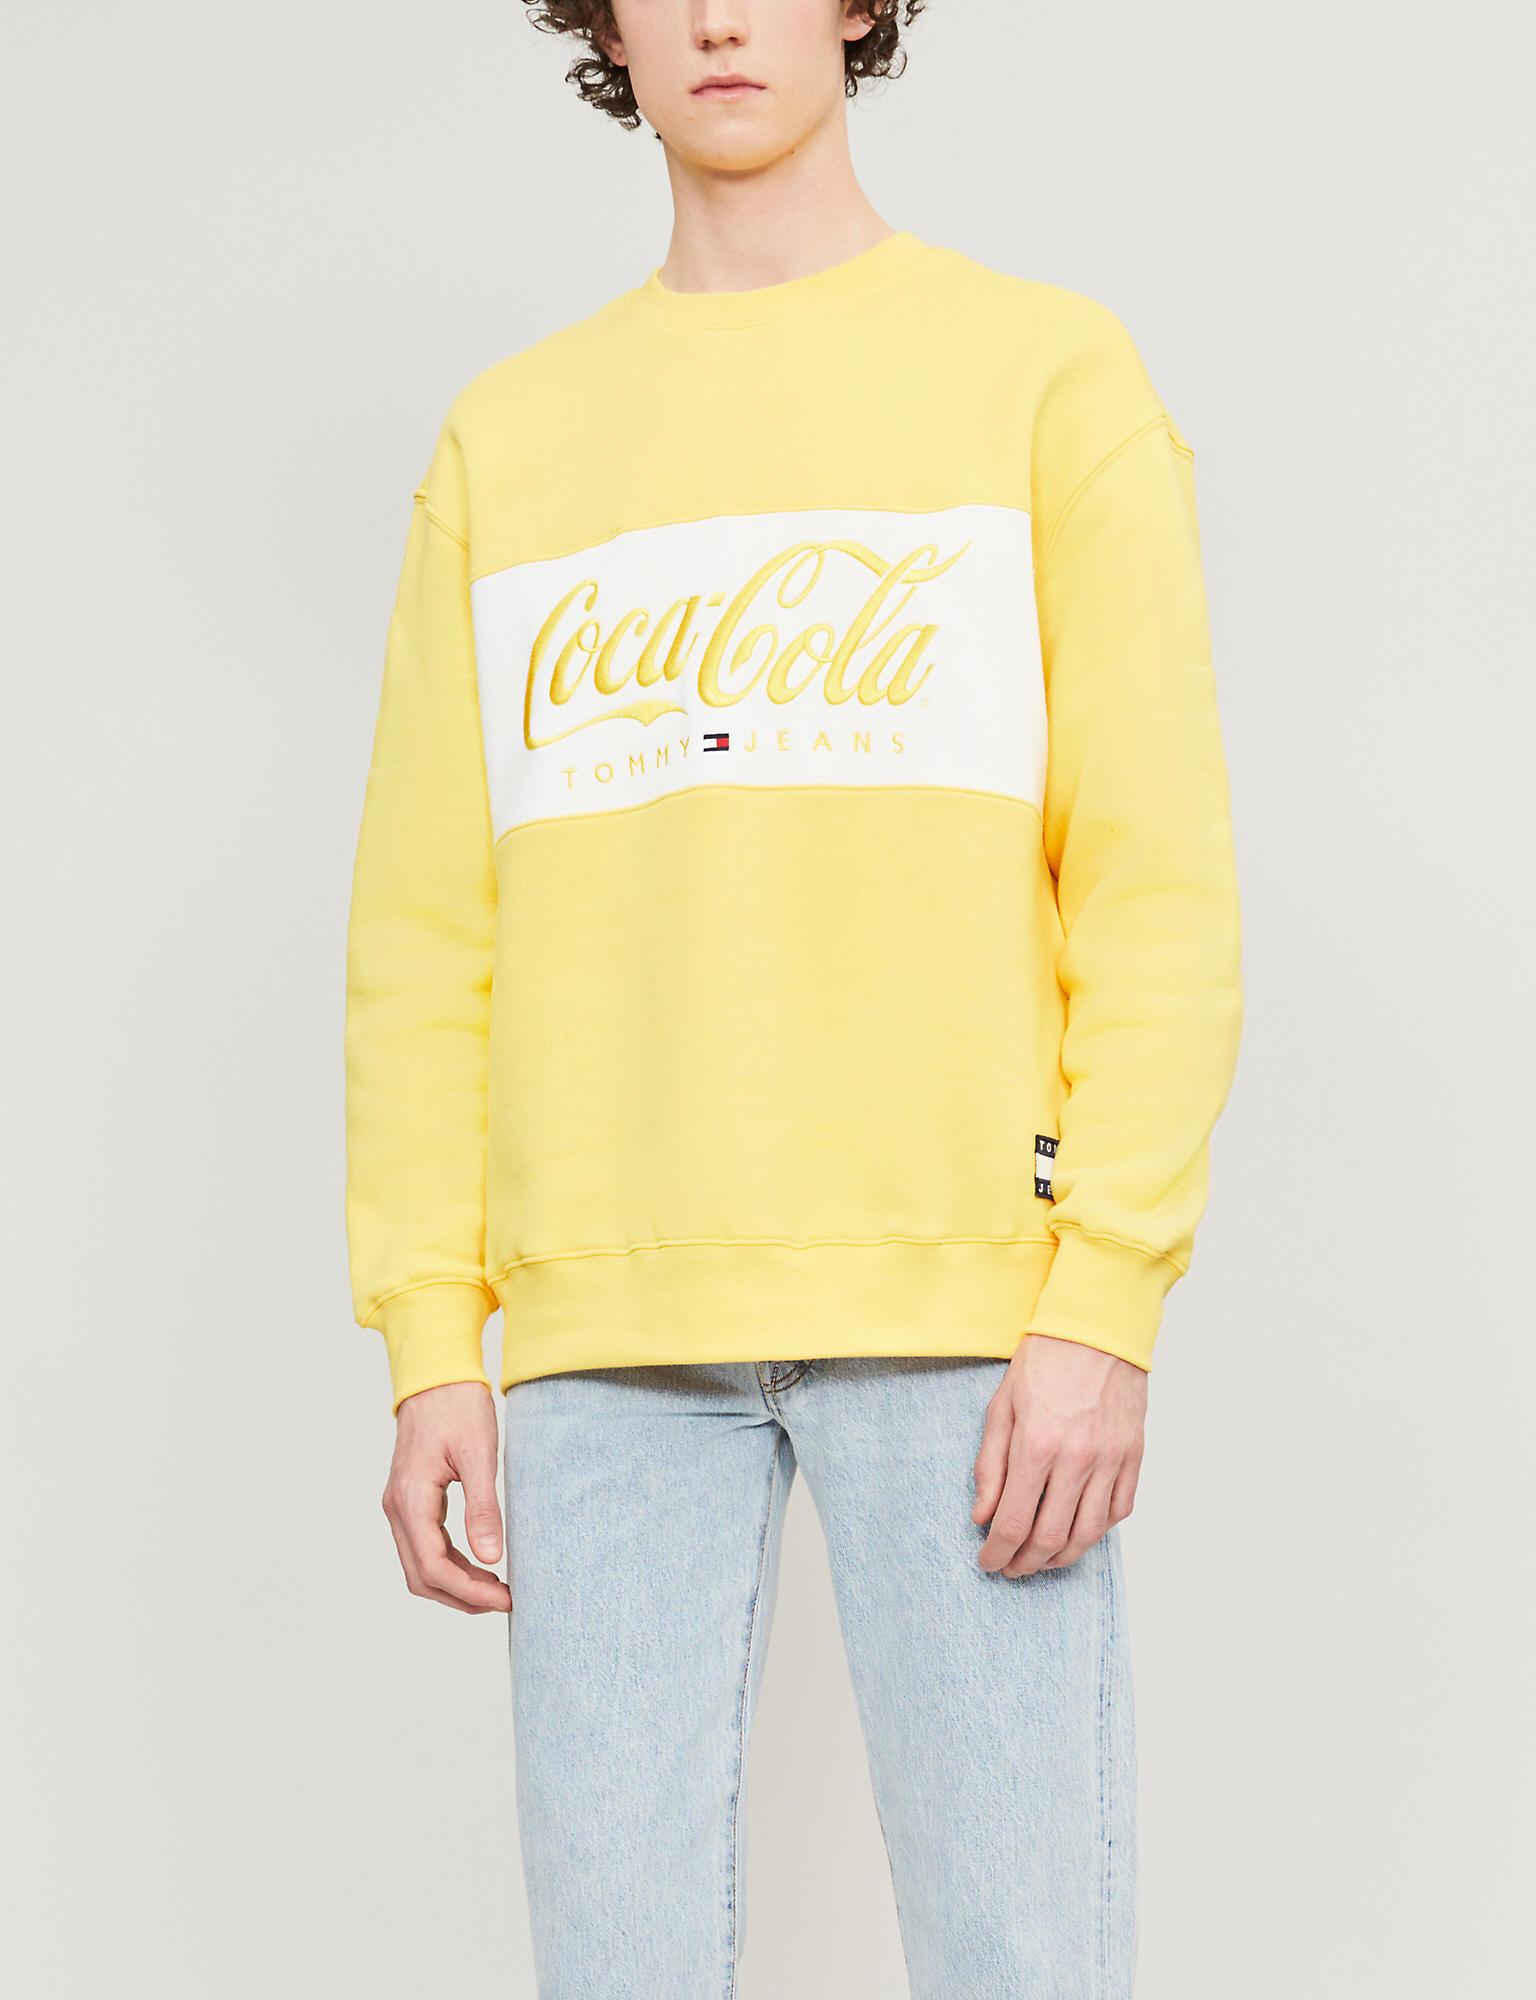 yellow tommy jeans crew neck